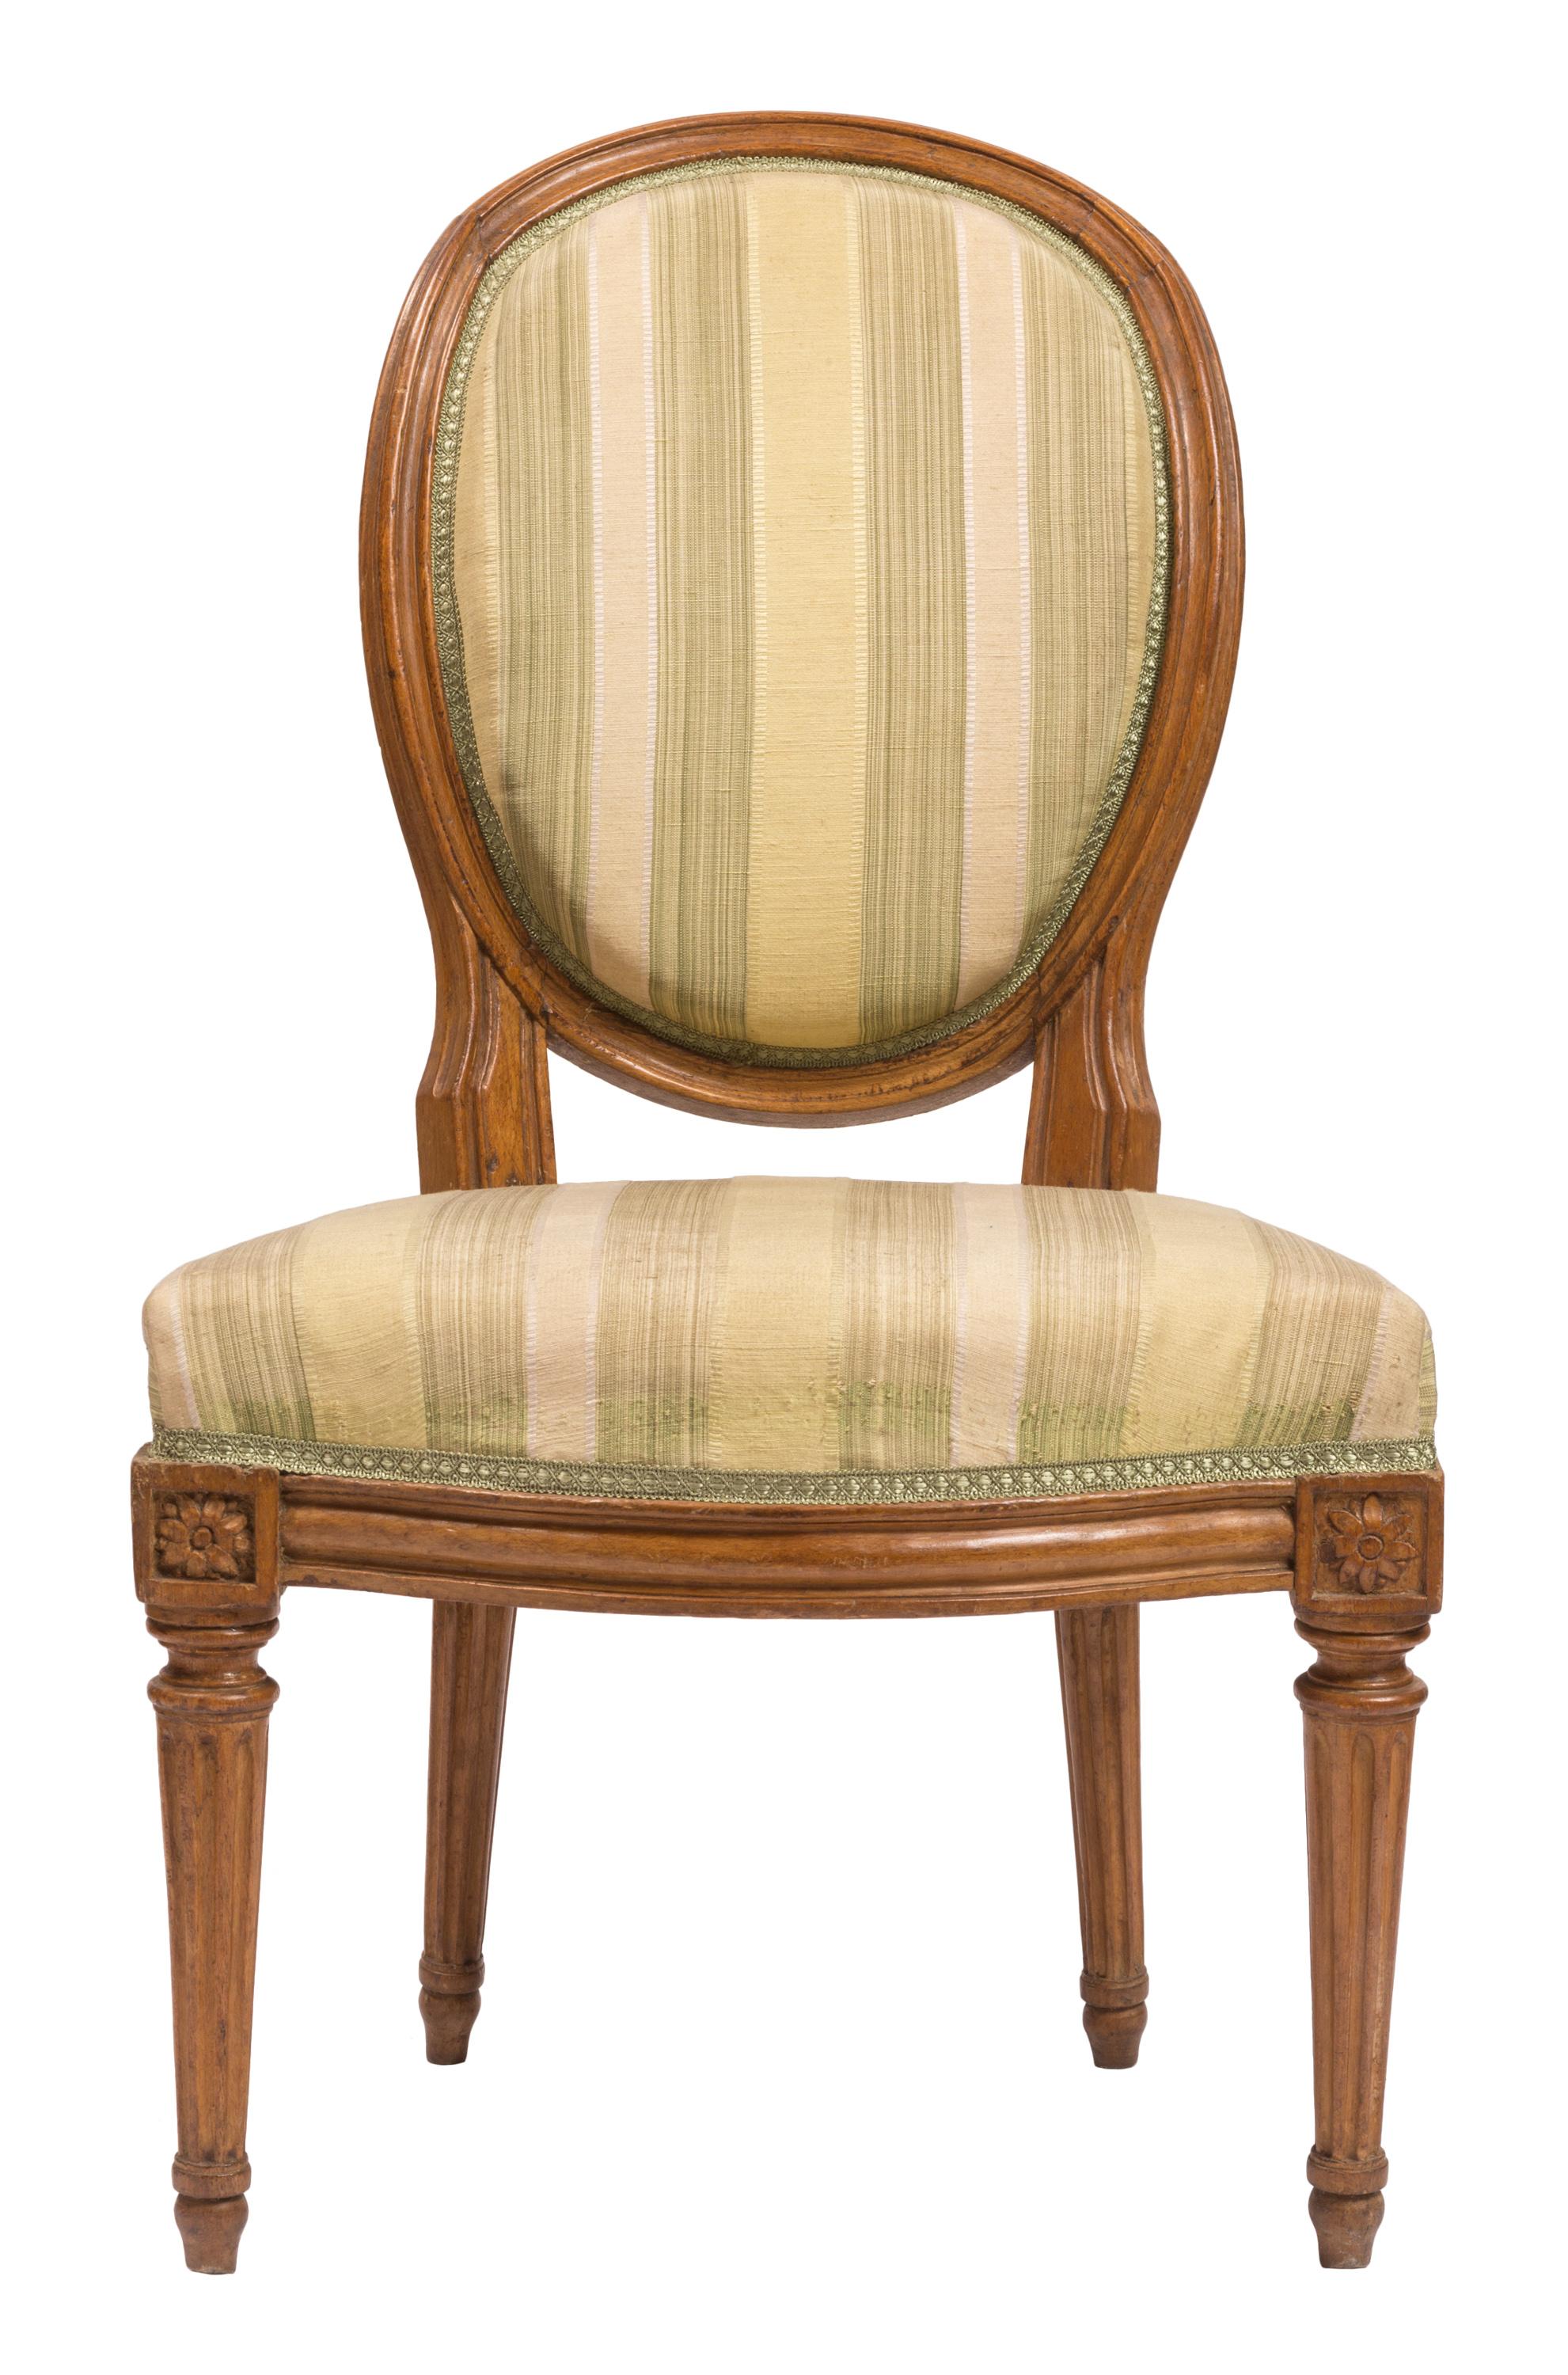 A matched set of 19th century Louis XVI style dining or side chairs with walnut furniture, nicely carved floral rosettes, and new cream and light green striped silk upholstery. A Classic chair silhouette with its rounded, framed seat back, combined